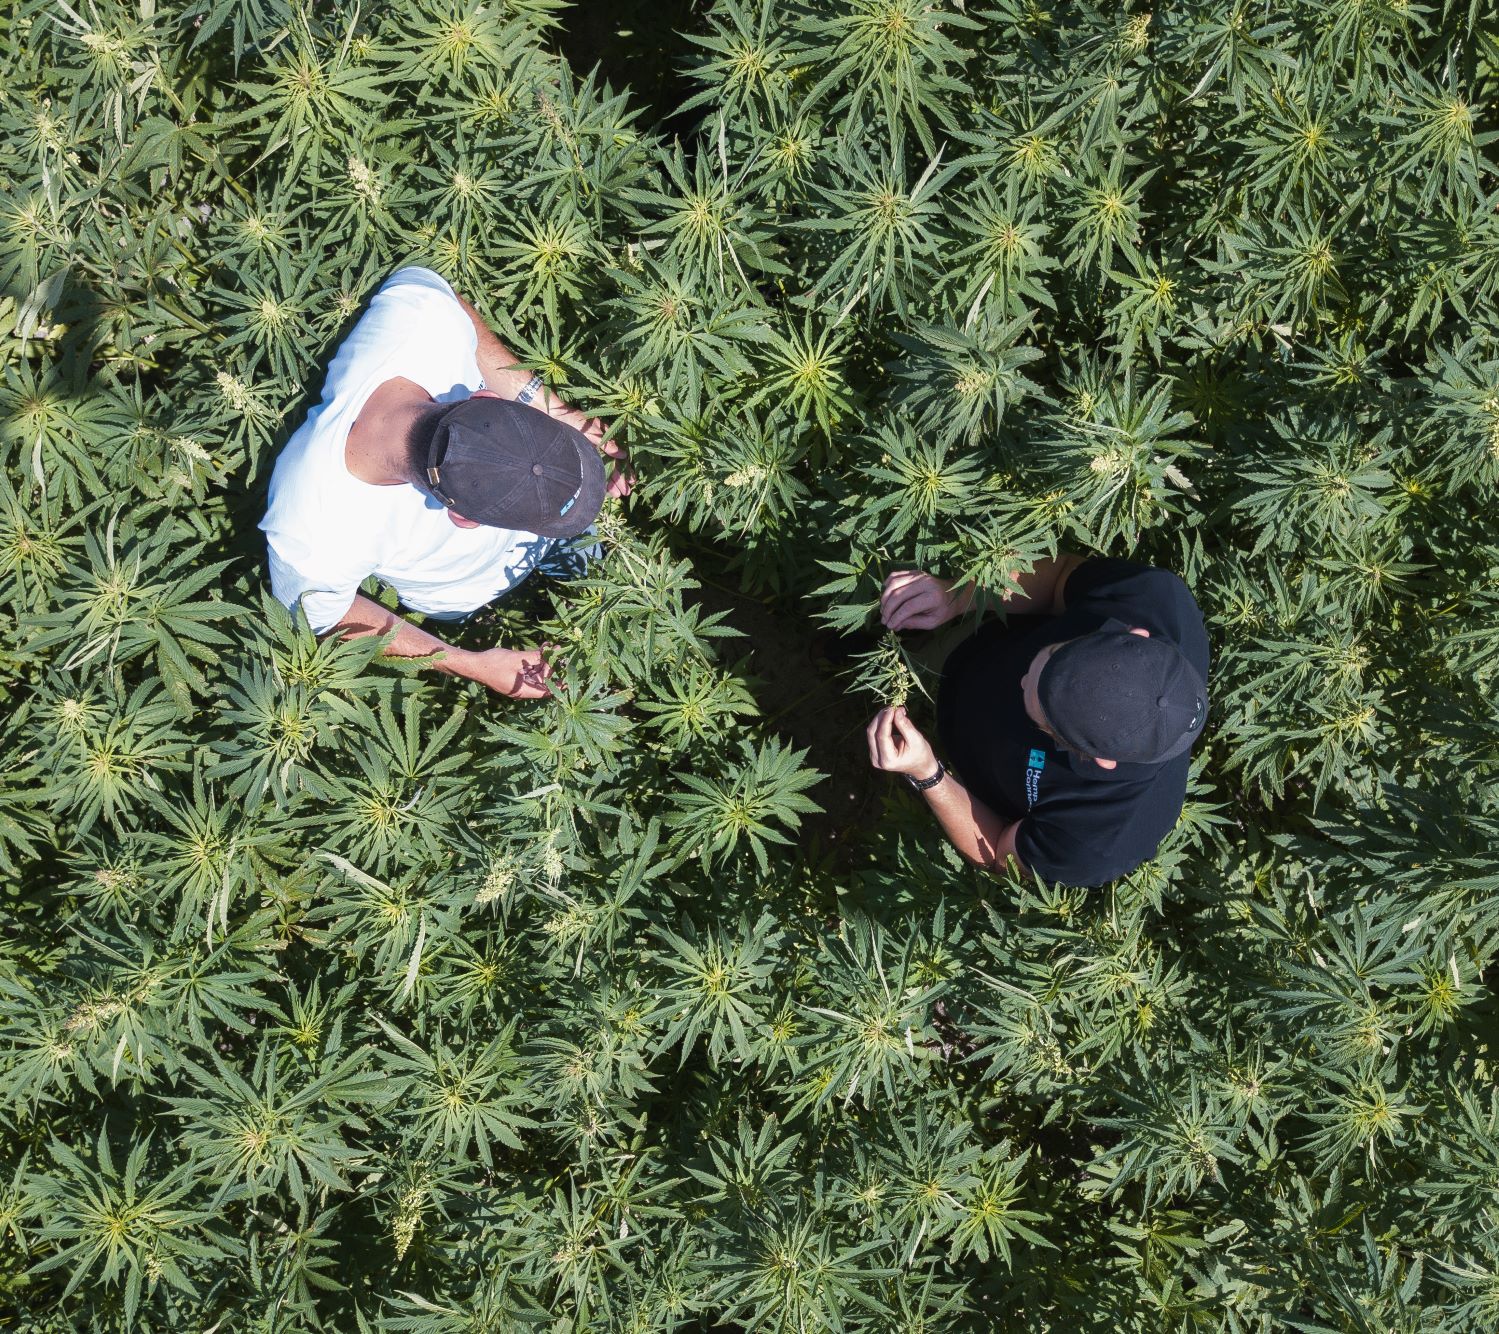 A birds eye view of 2 workers in a hemp plantation.